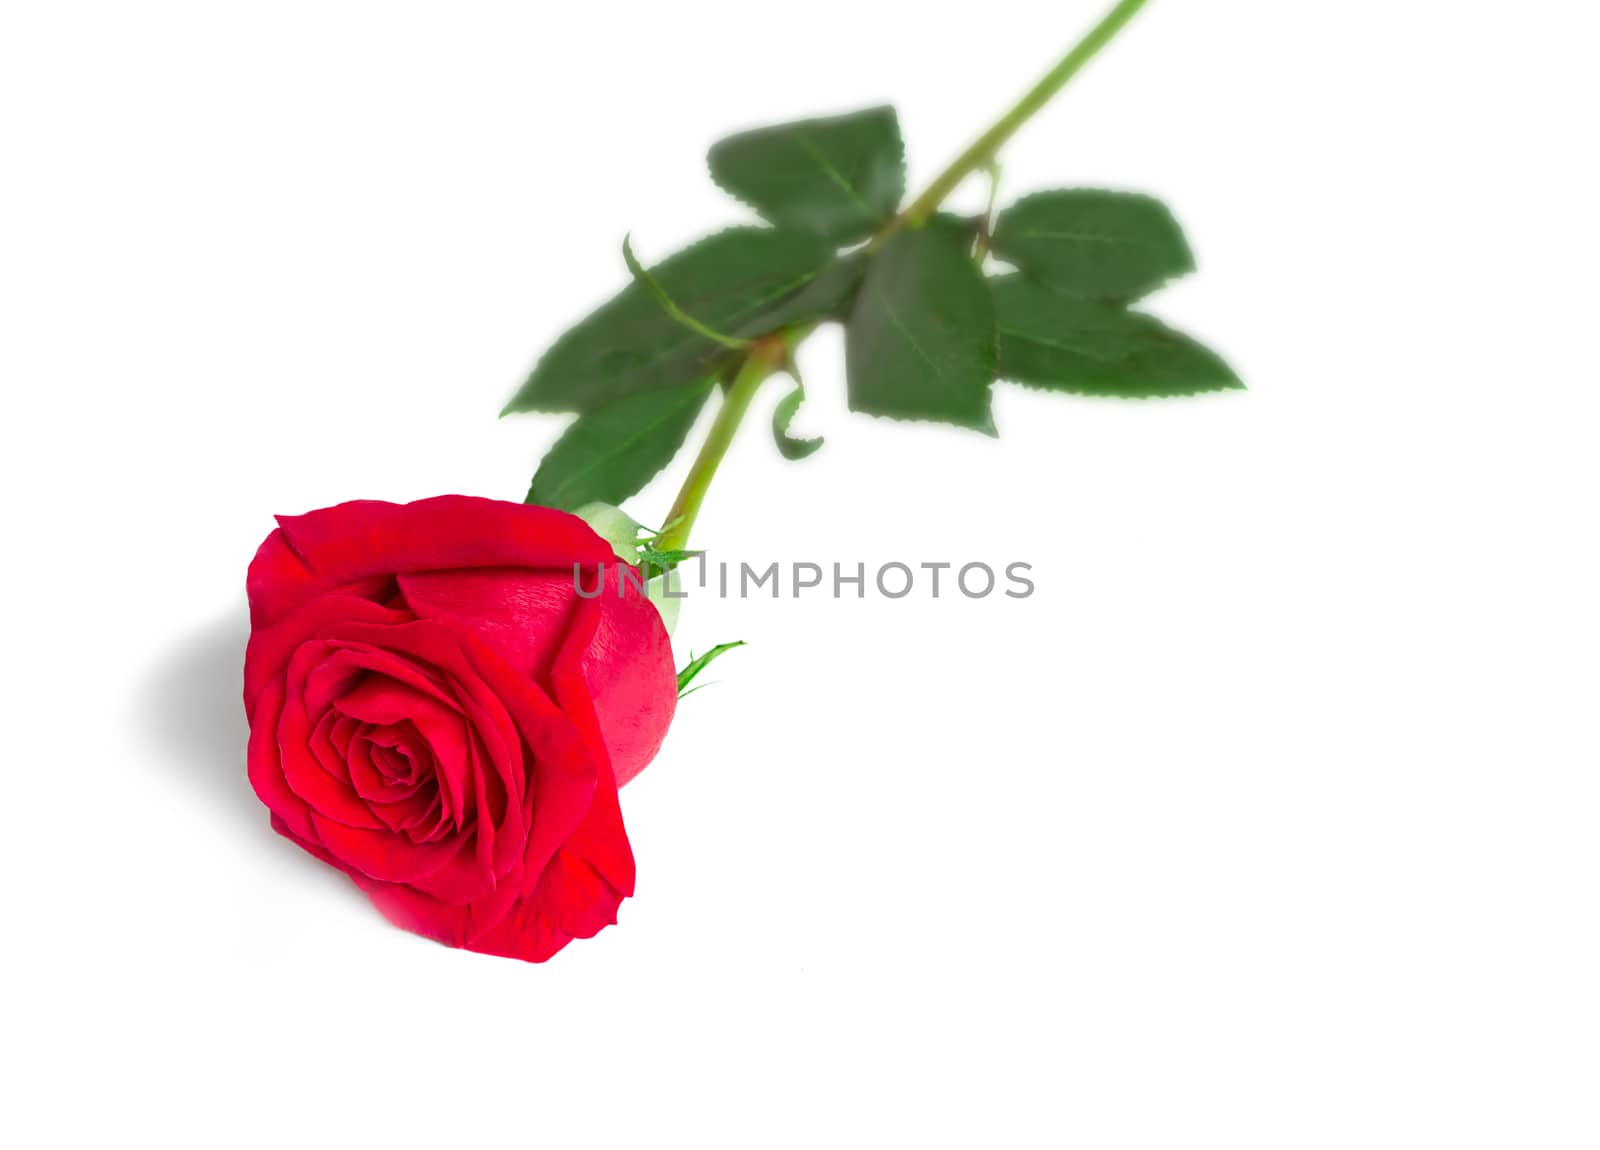 Big beautiful red rose leafs. Presented on a white background.